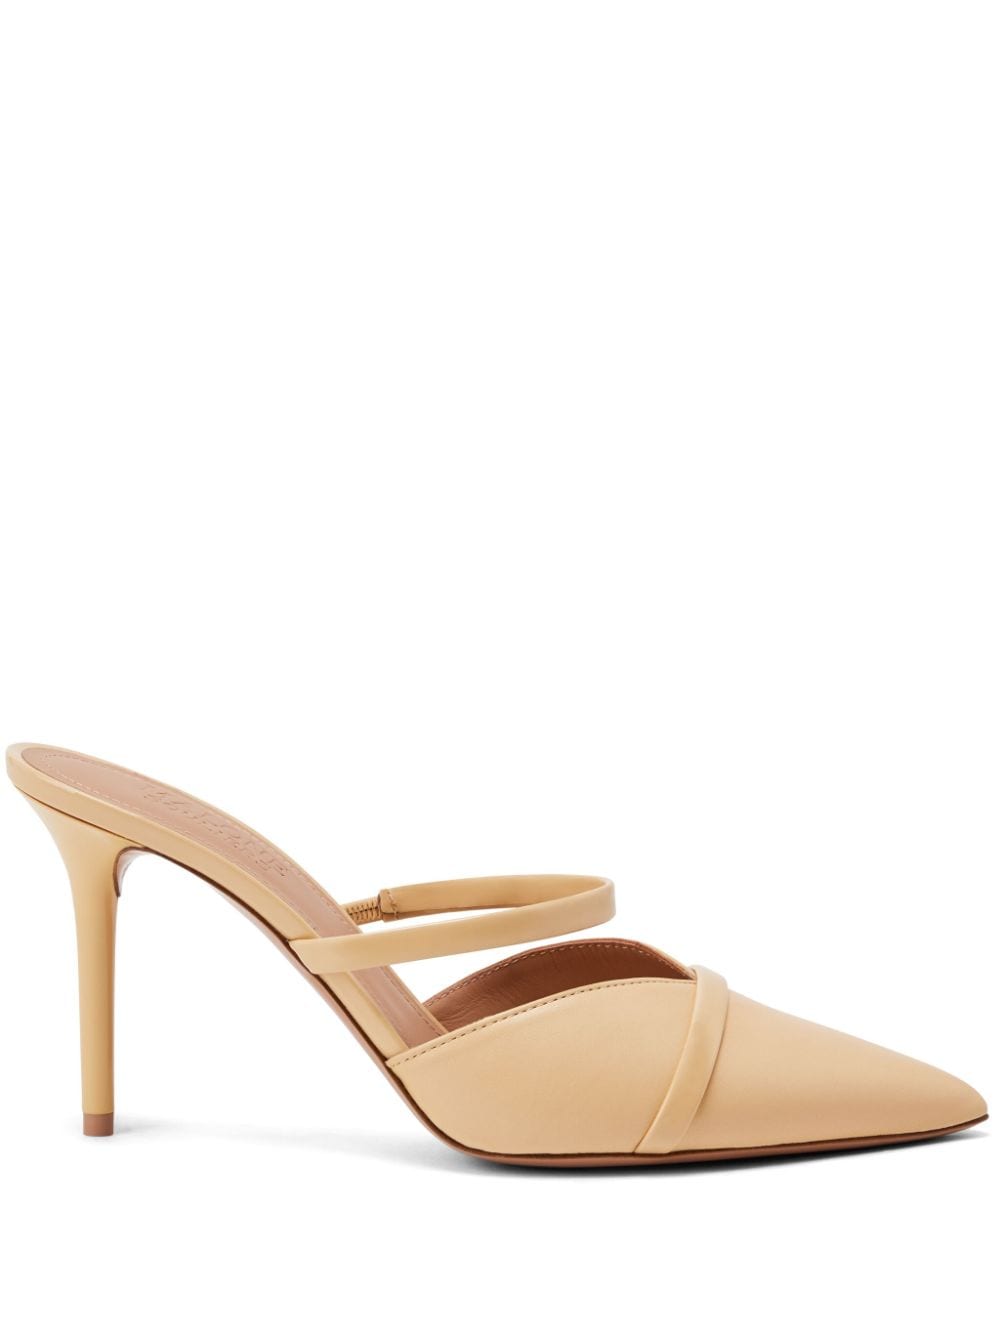 Malone Souliers Frankie Mules 85mm - Nude von Malone Souliers